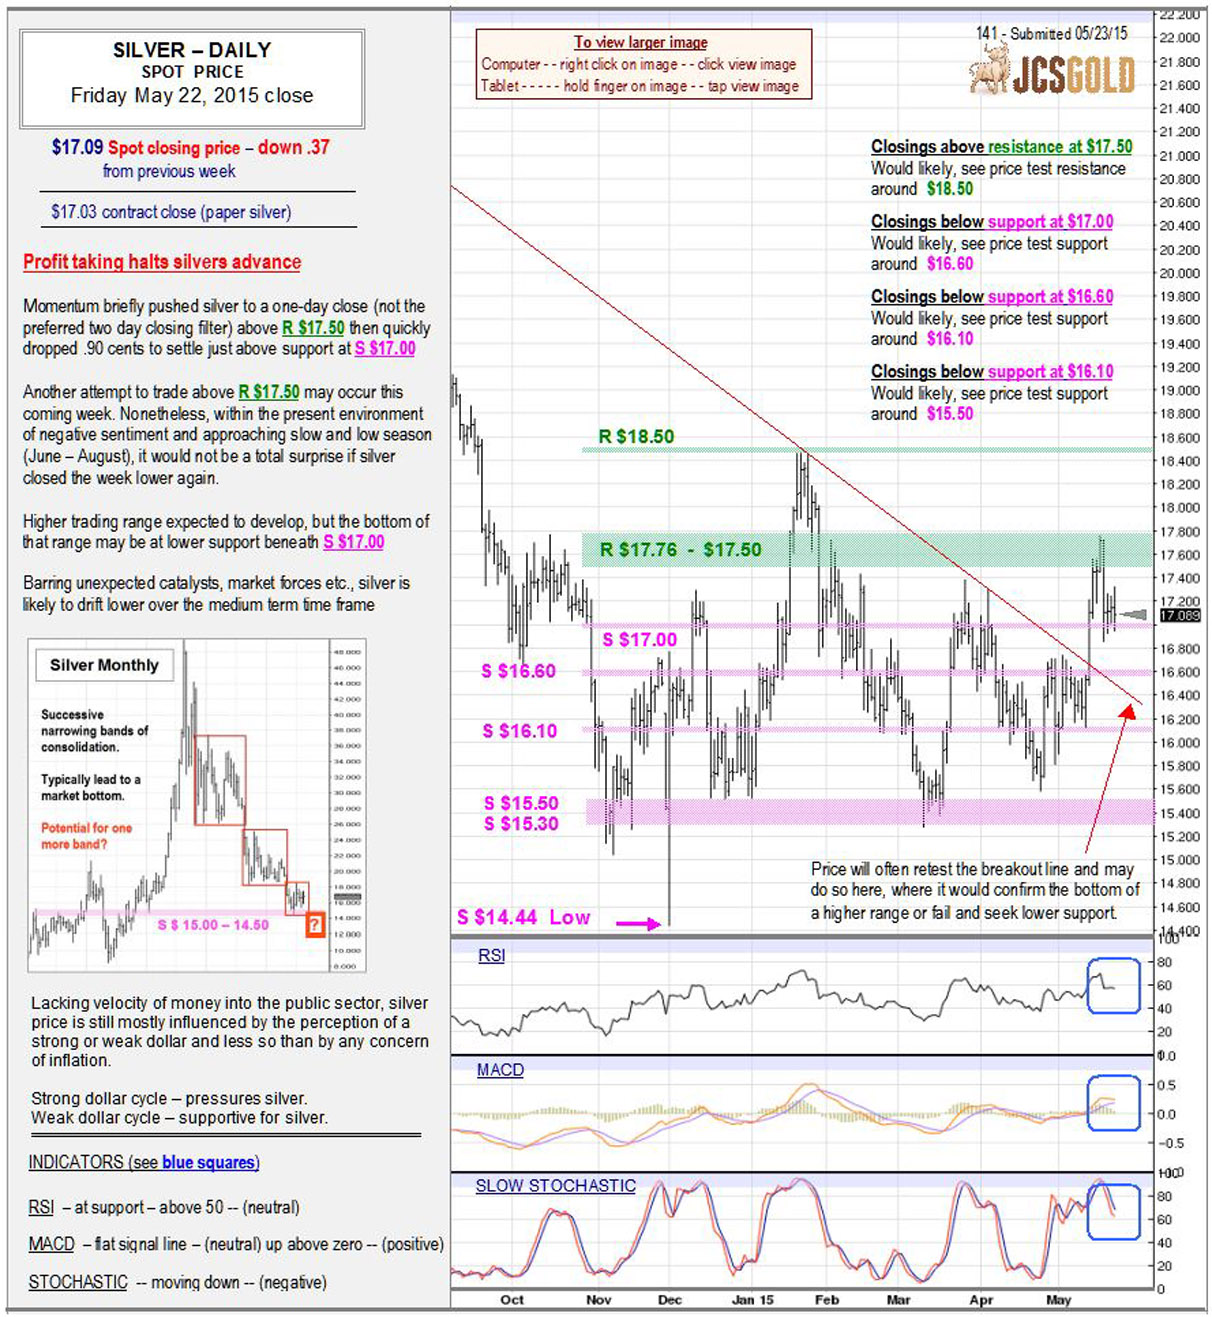 May 22, 2015 chart & commentary